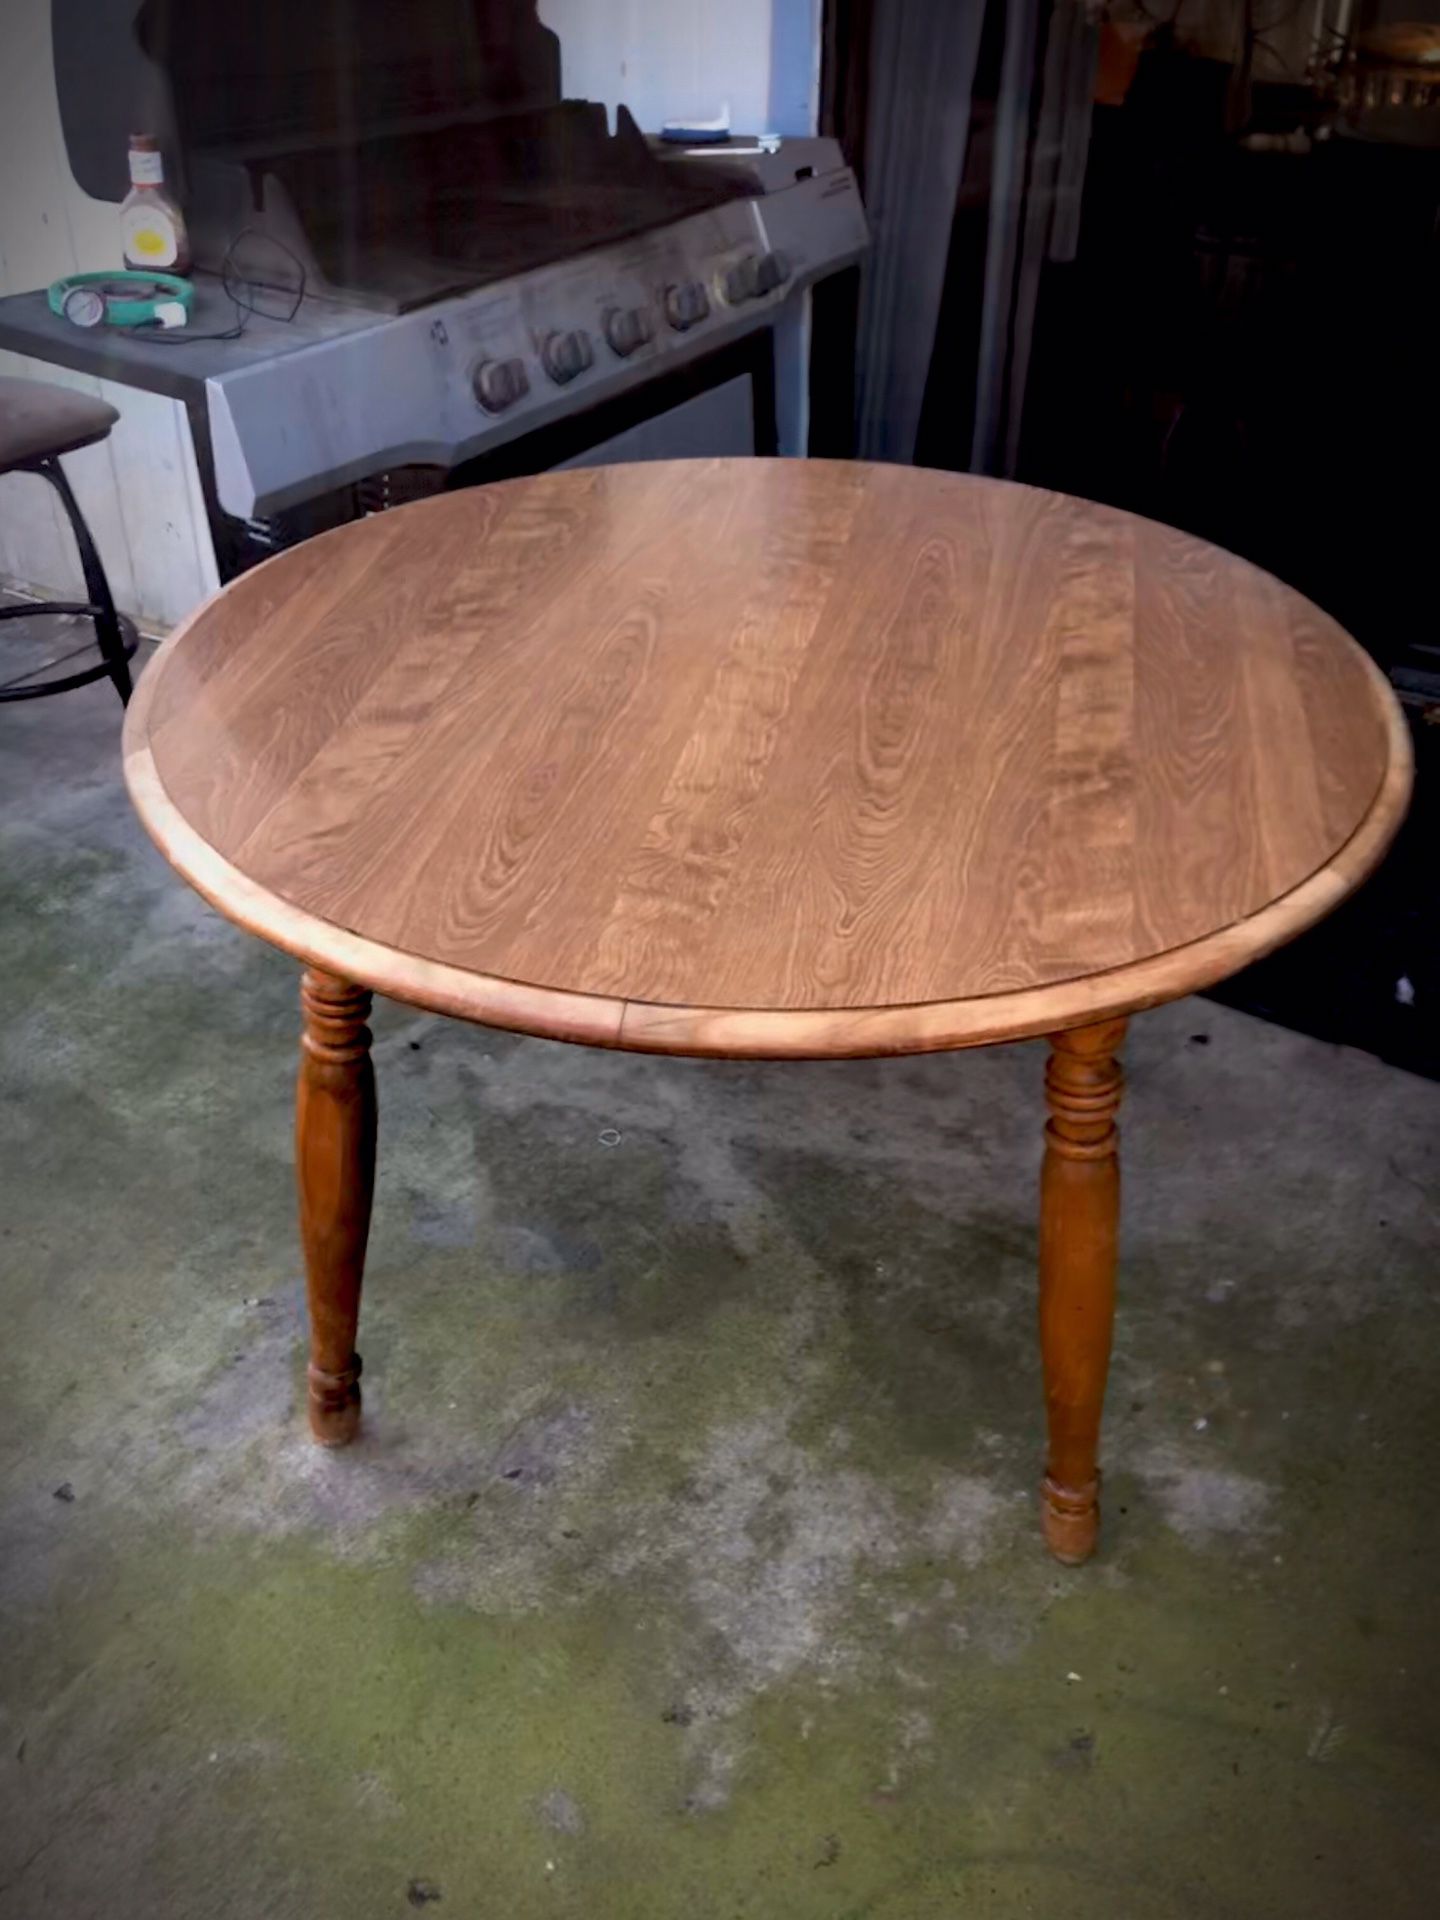 Solid Maple Wood Round Dining Table w/ 6 chairs